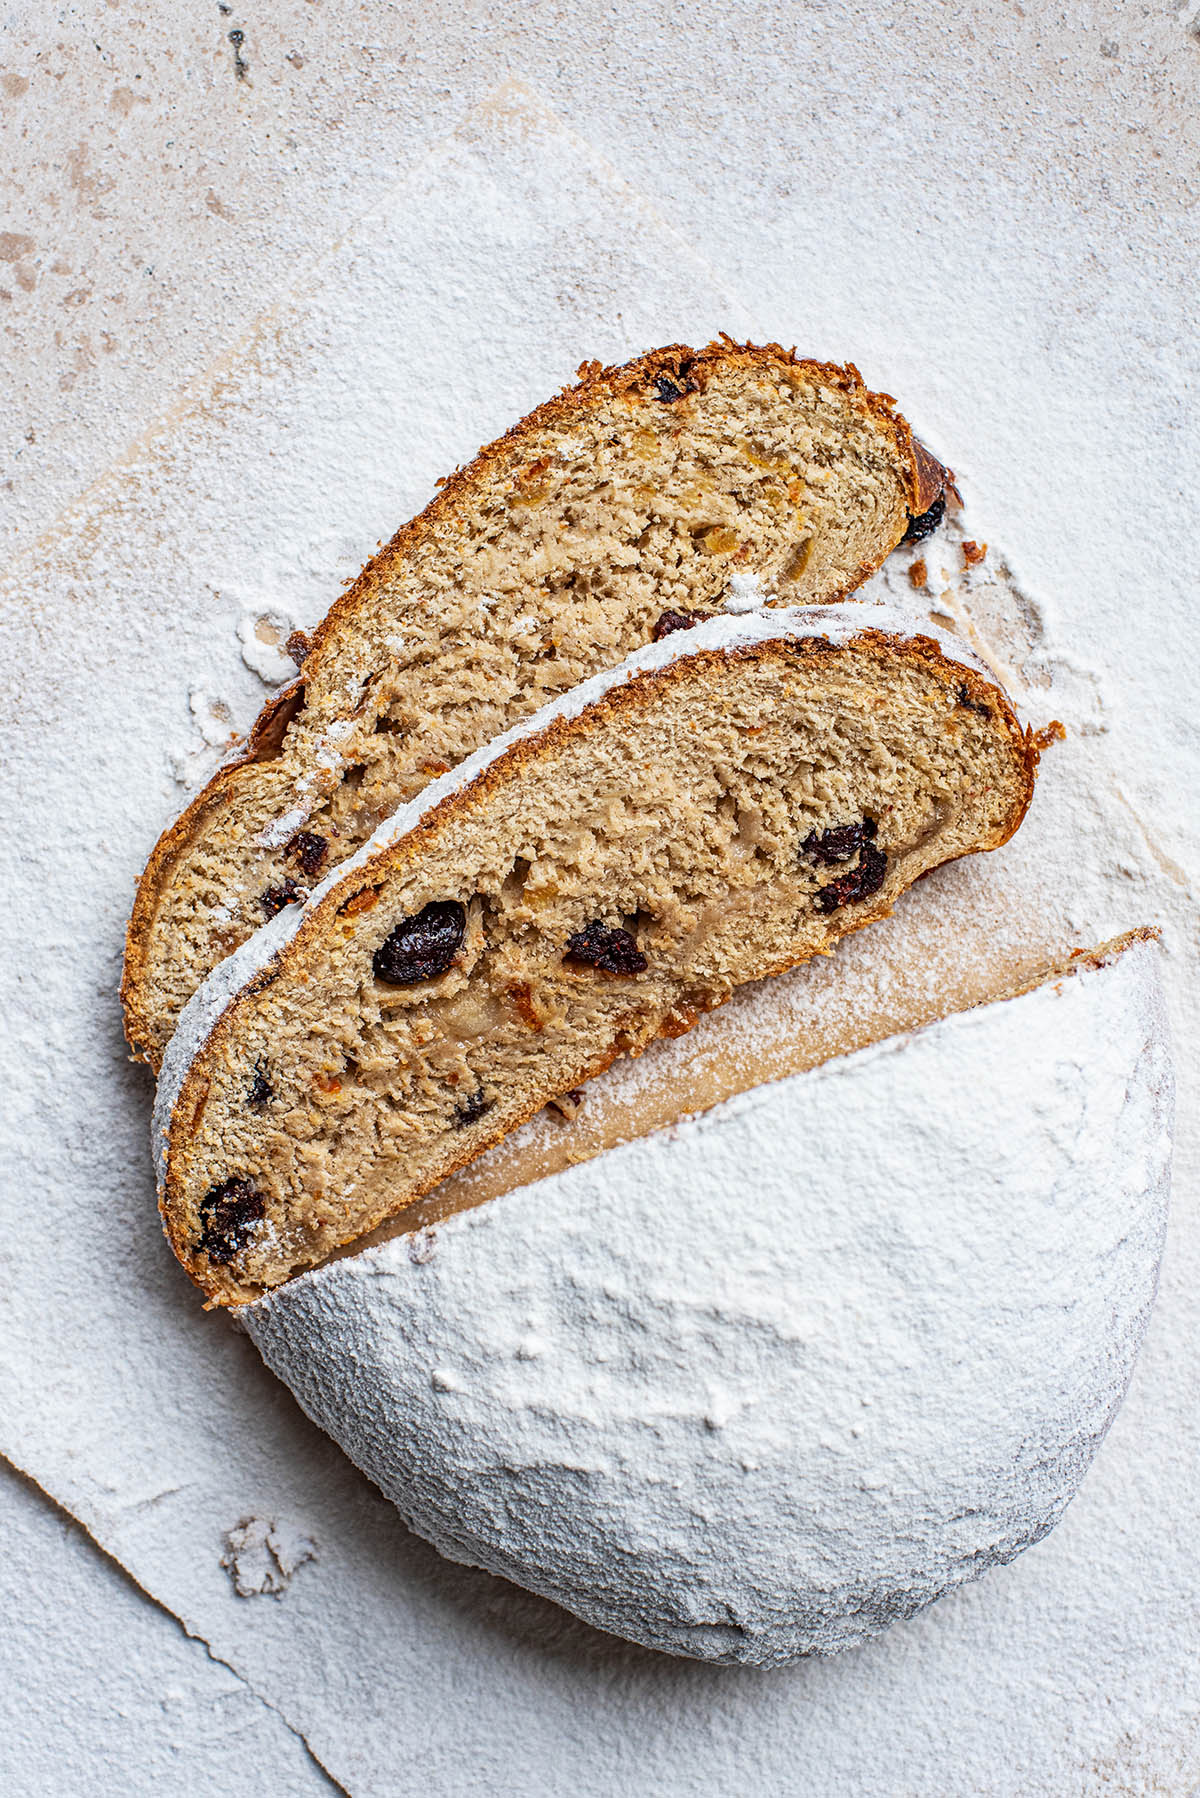 Icing sugar coated stollen with two slices cut.